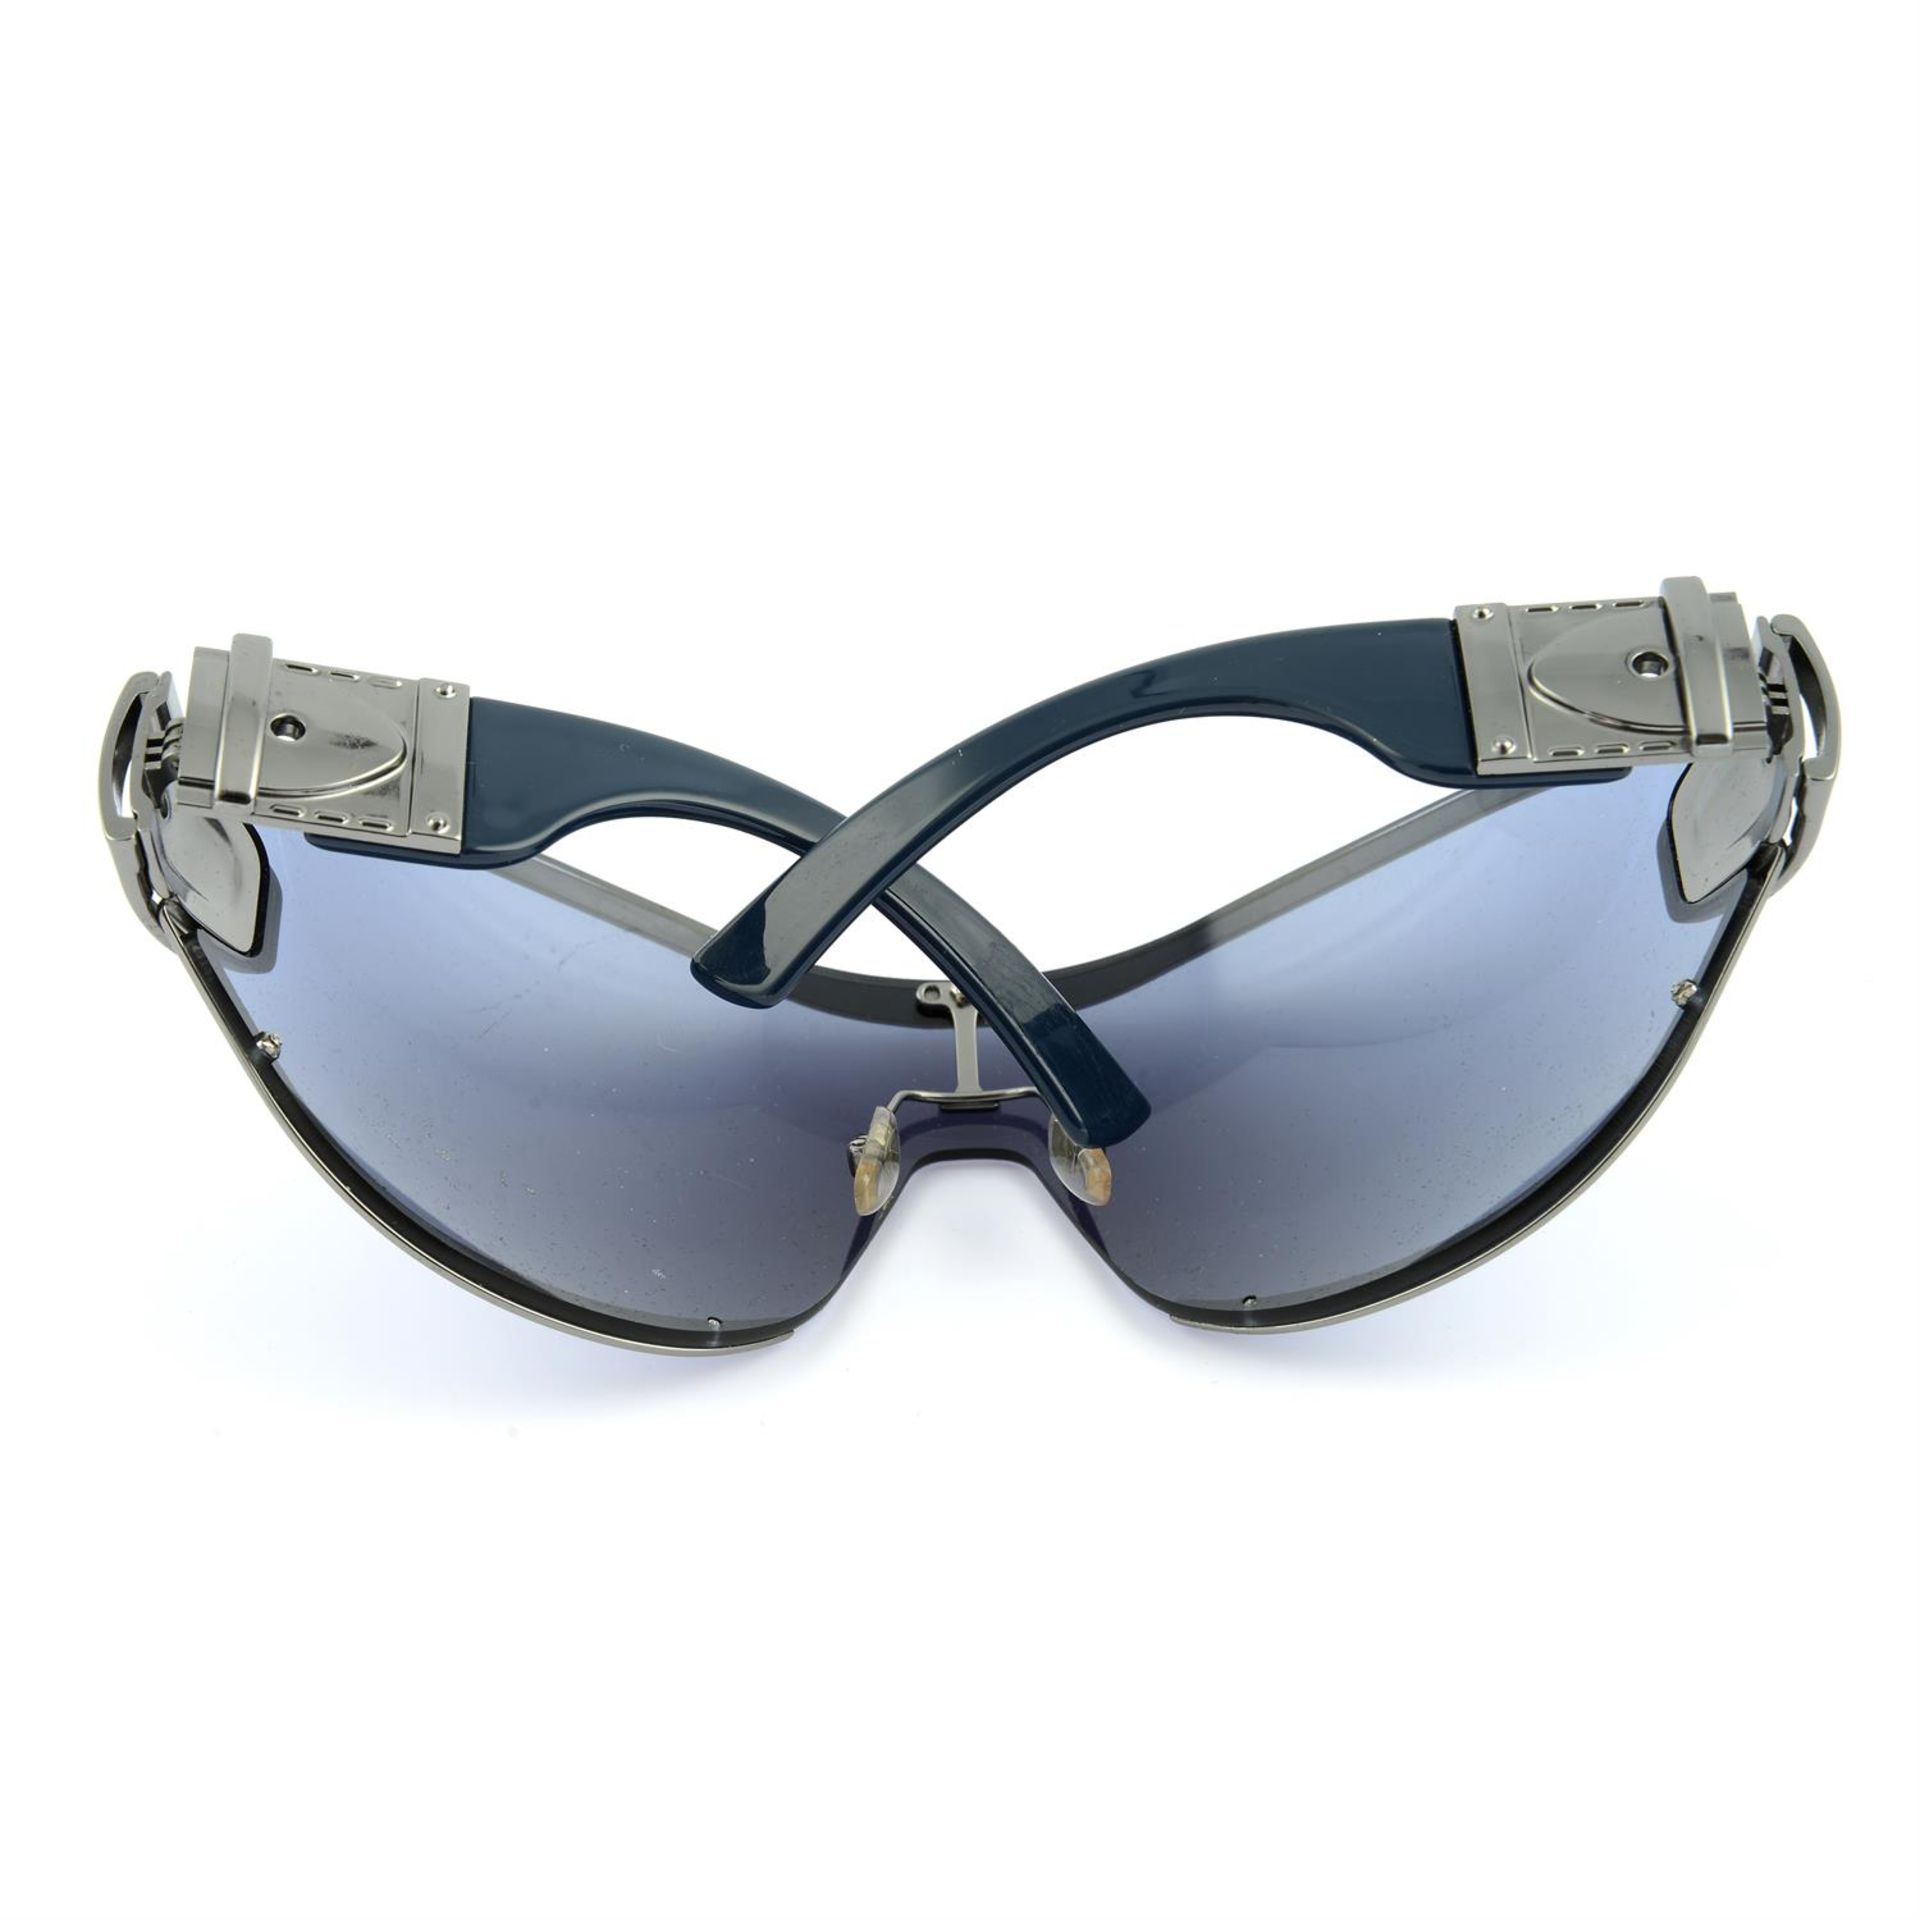 GUCCI - a pair of sunglasses. - Image 2 of 3